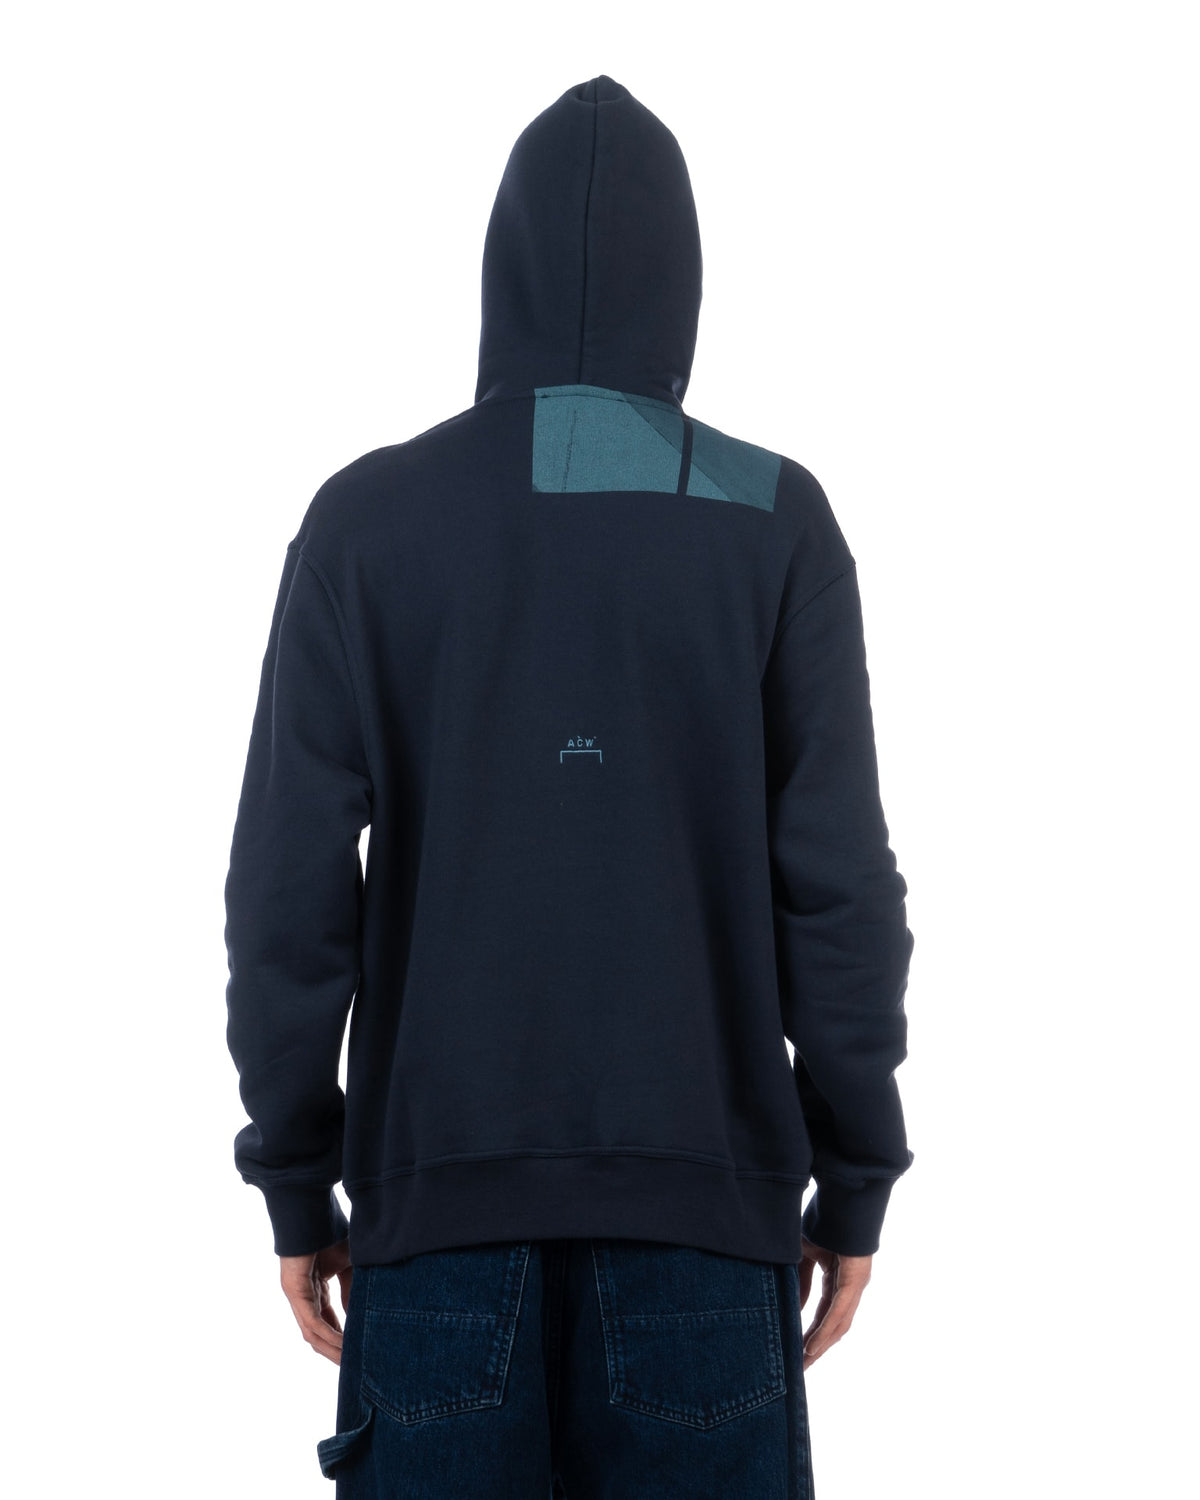 A-COLD-WALL* | Strand Hoodie Navy - Concrete